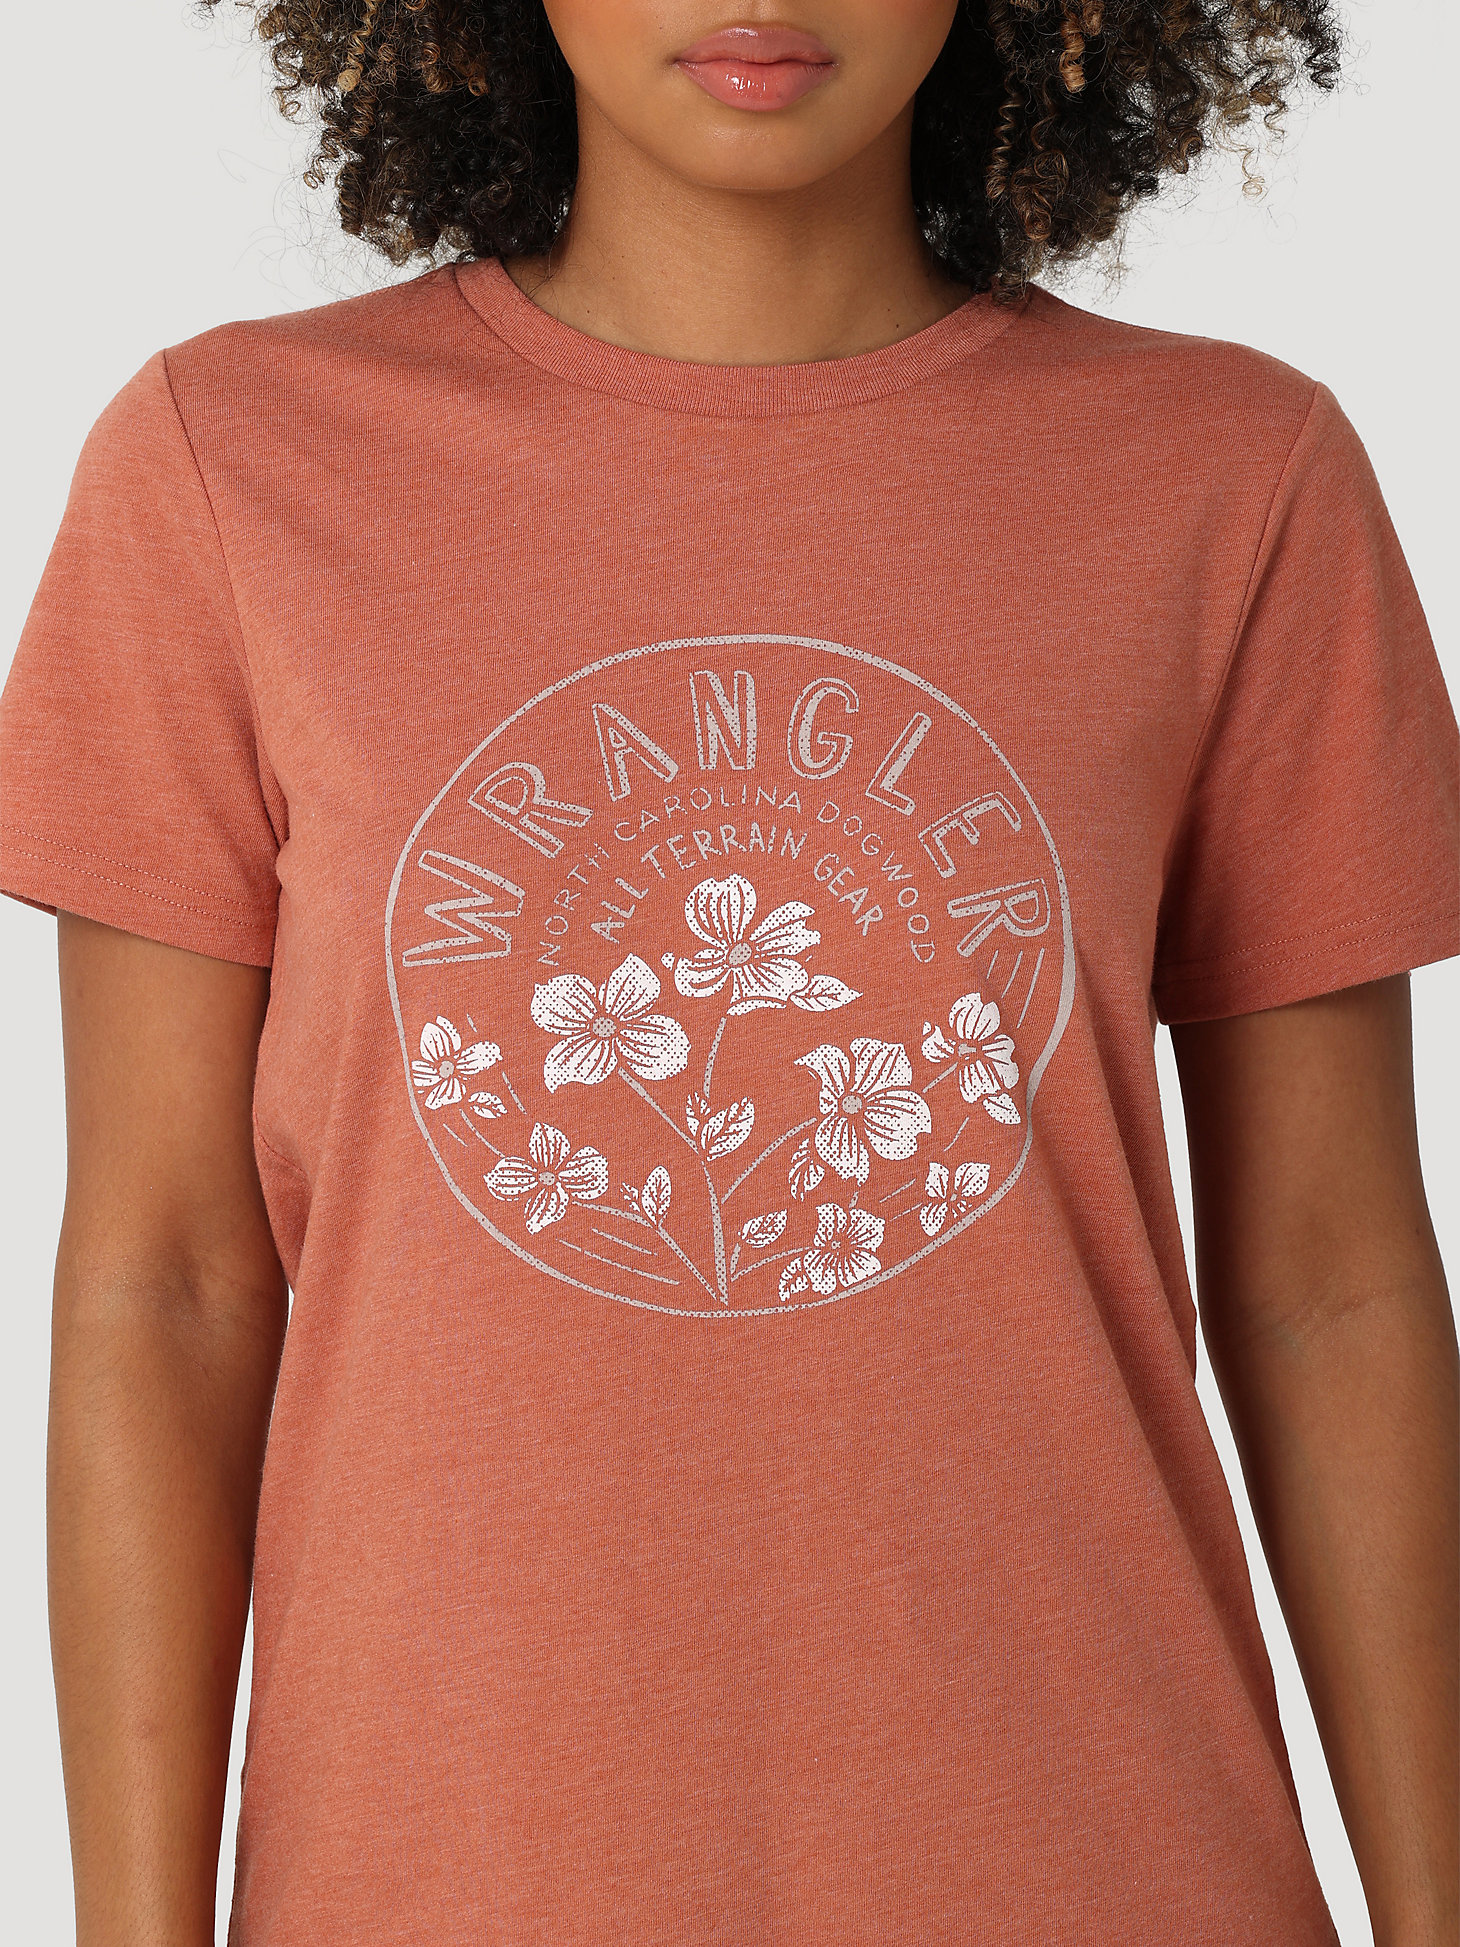 ATG By Wrangler™ Women's Graphic Tee in Redwood alternative view 1